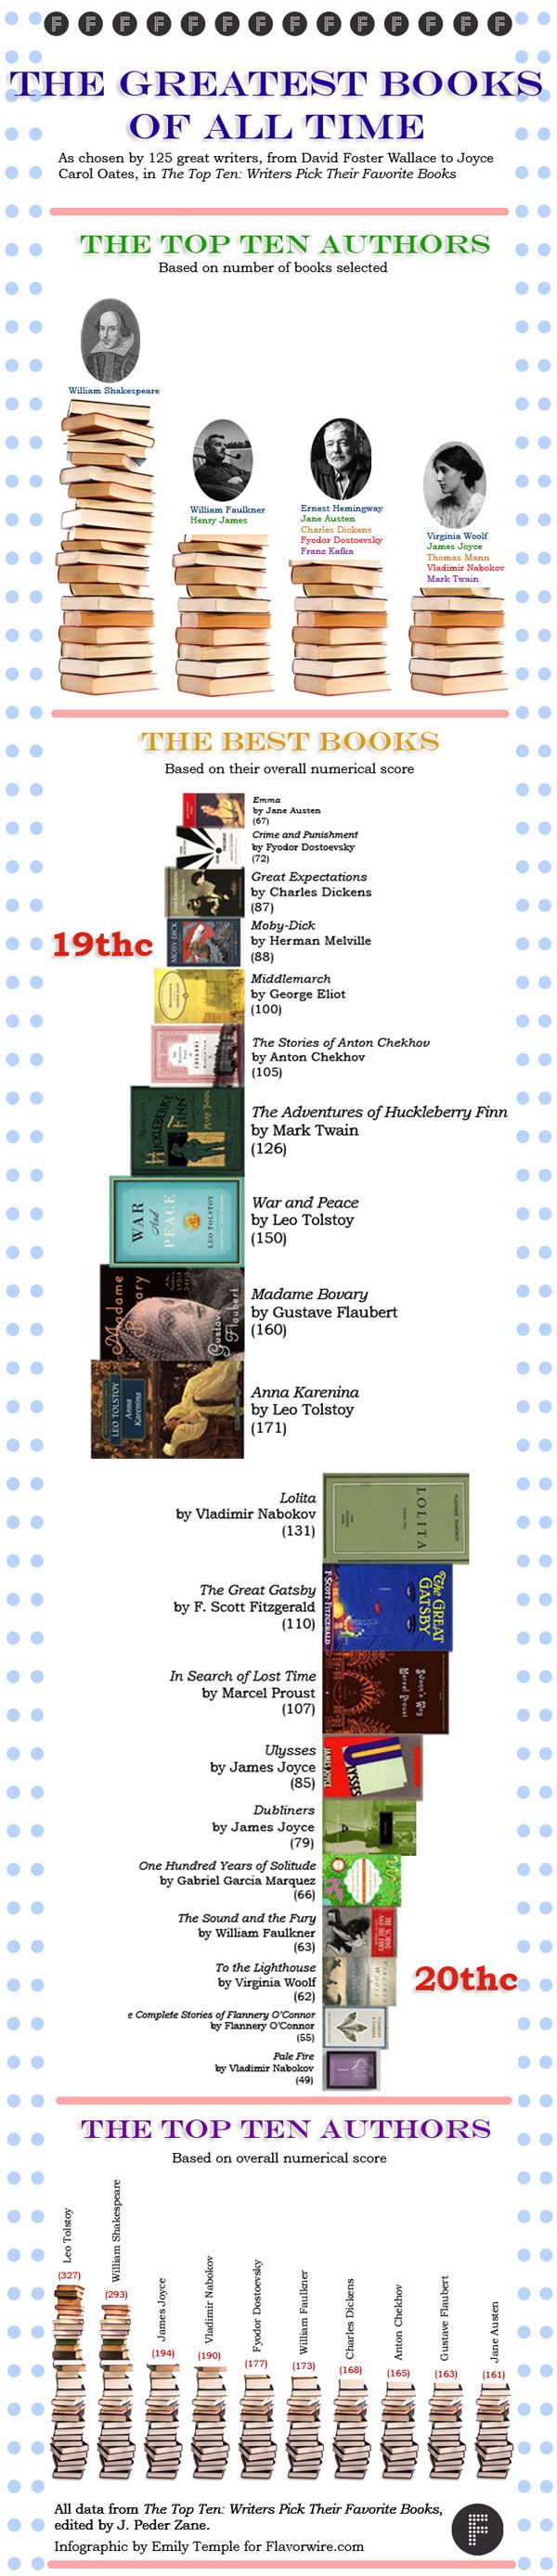 The Greatest Books of All Time (Infographic)